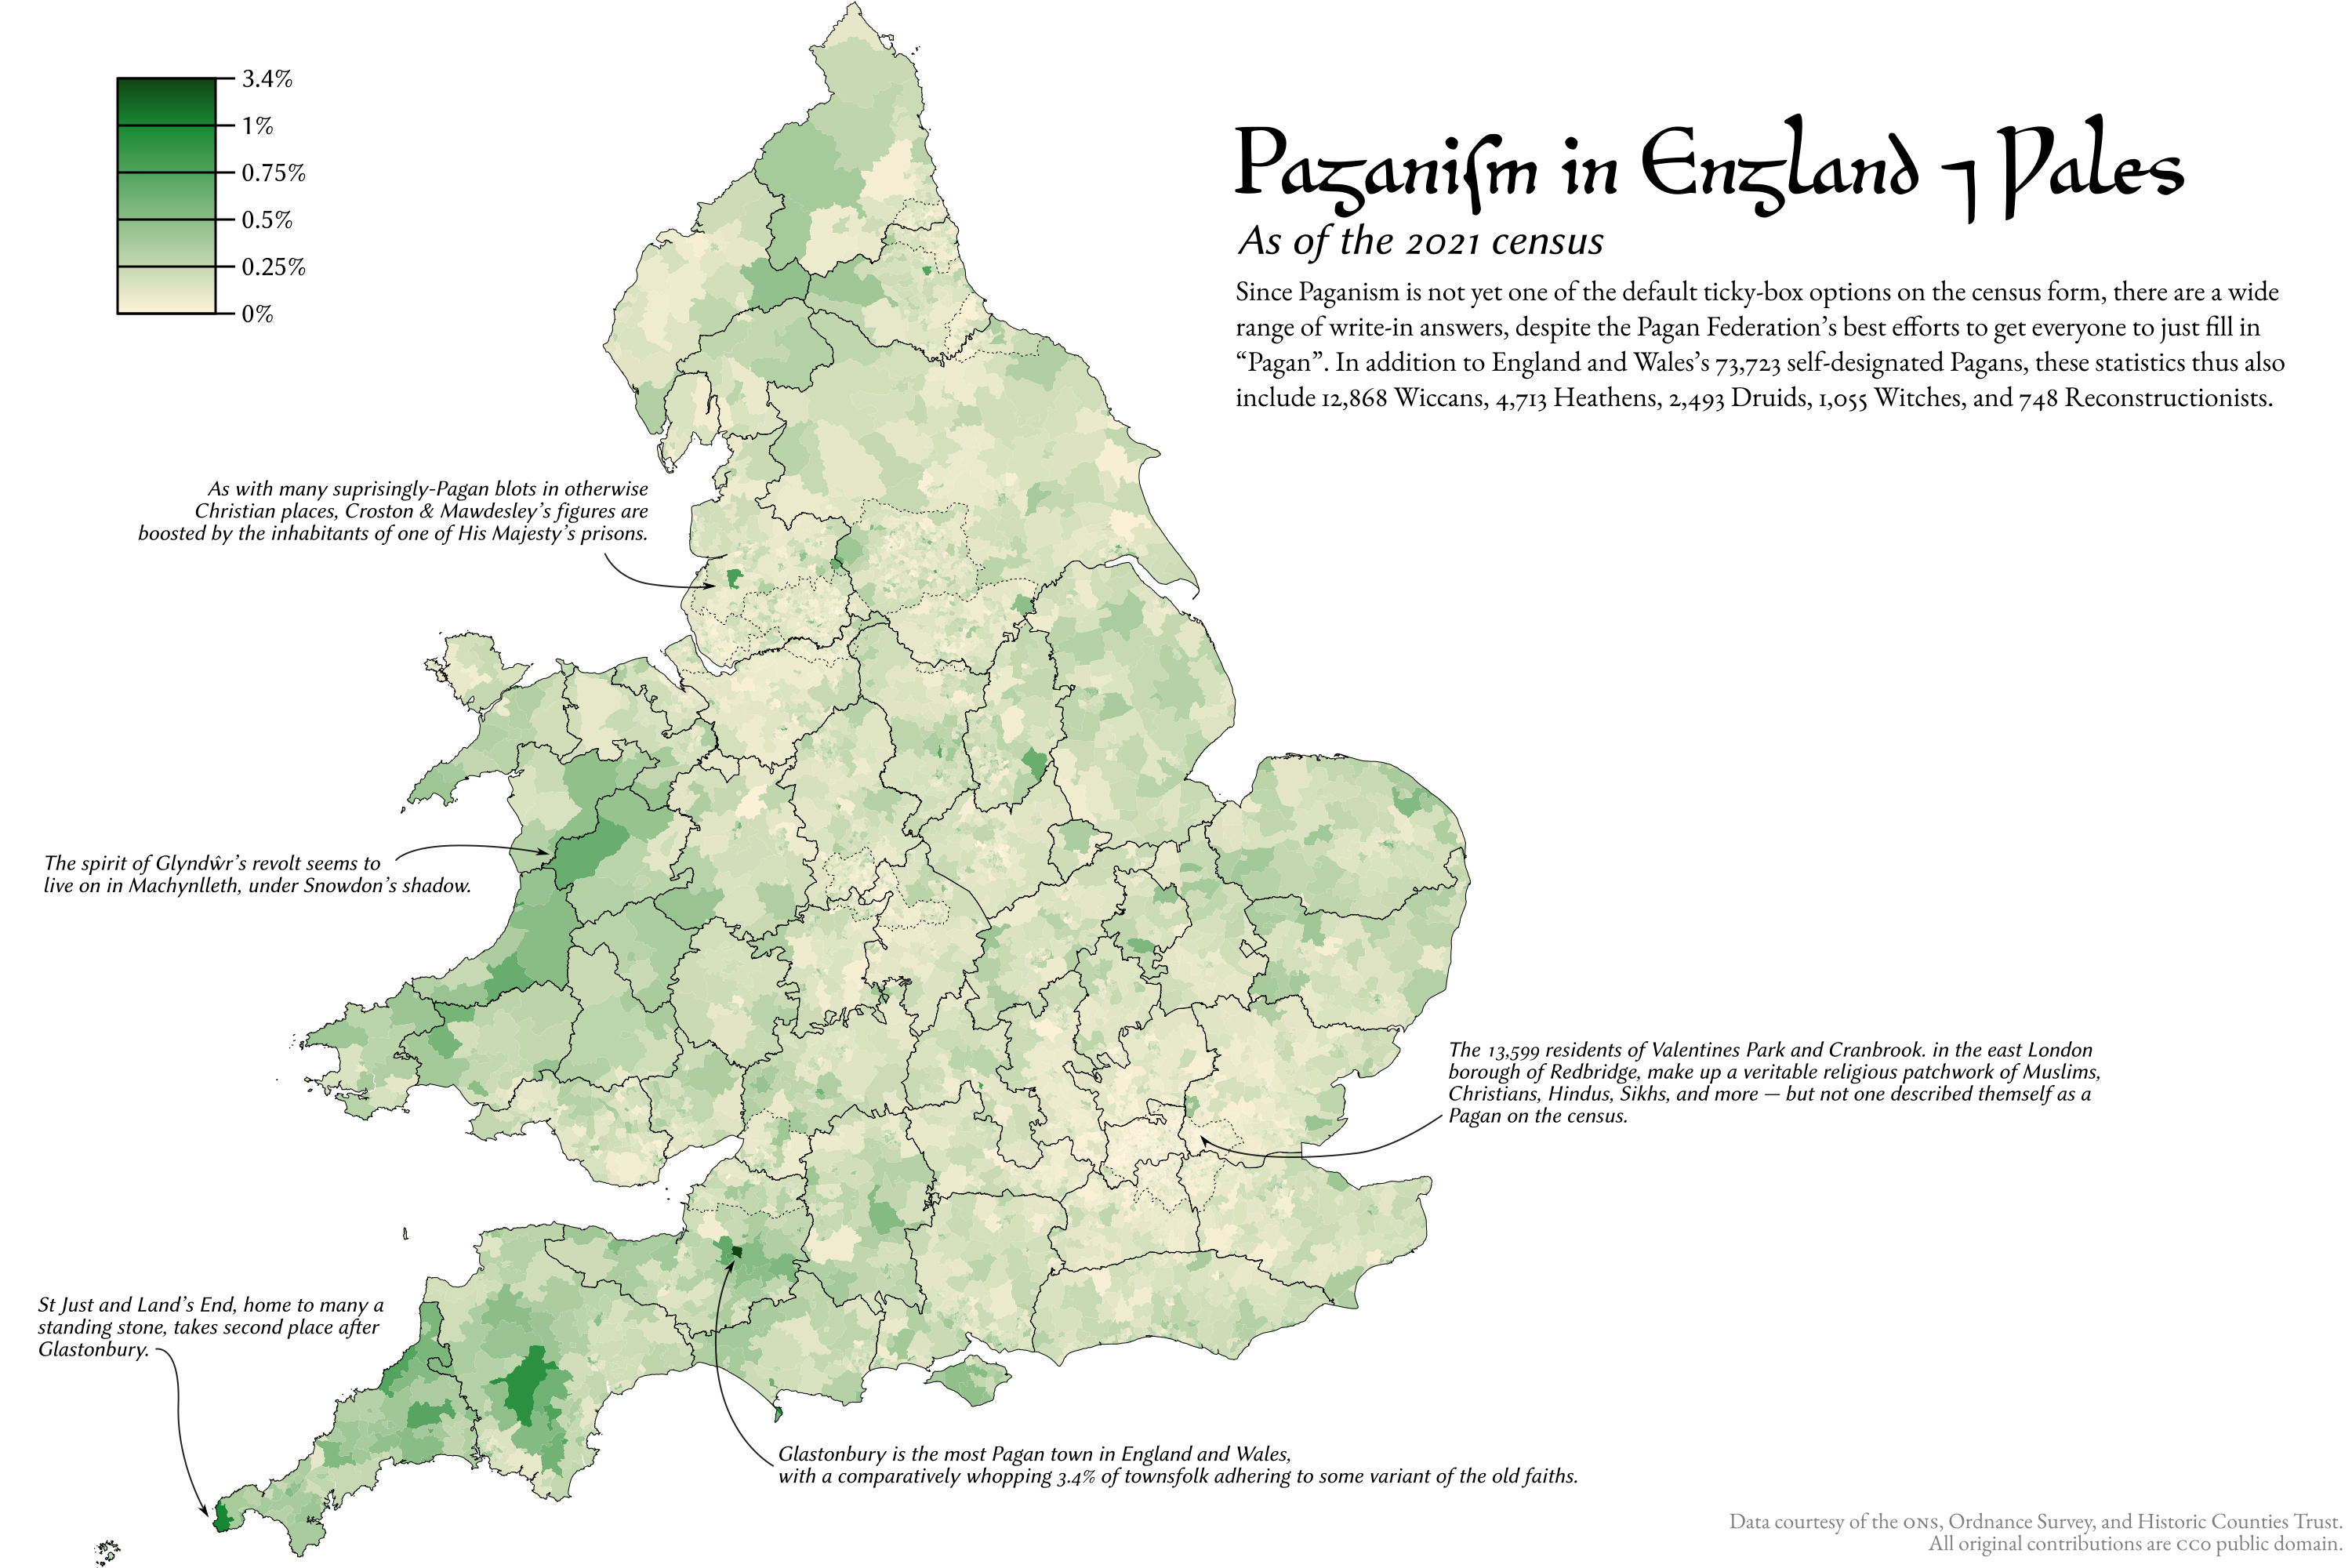 A map of Paganism in England and Wales, showing it to be most popular in Wales and the south-west of England, particularly Glastonbury